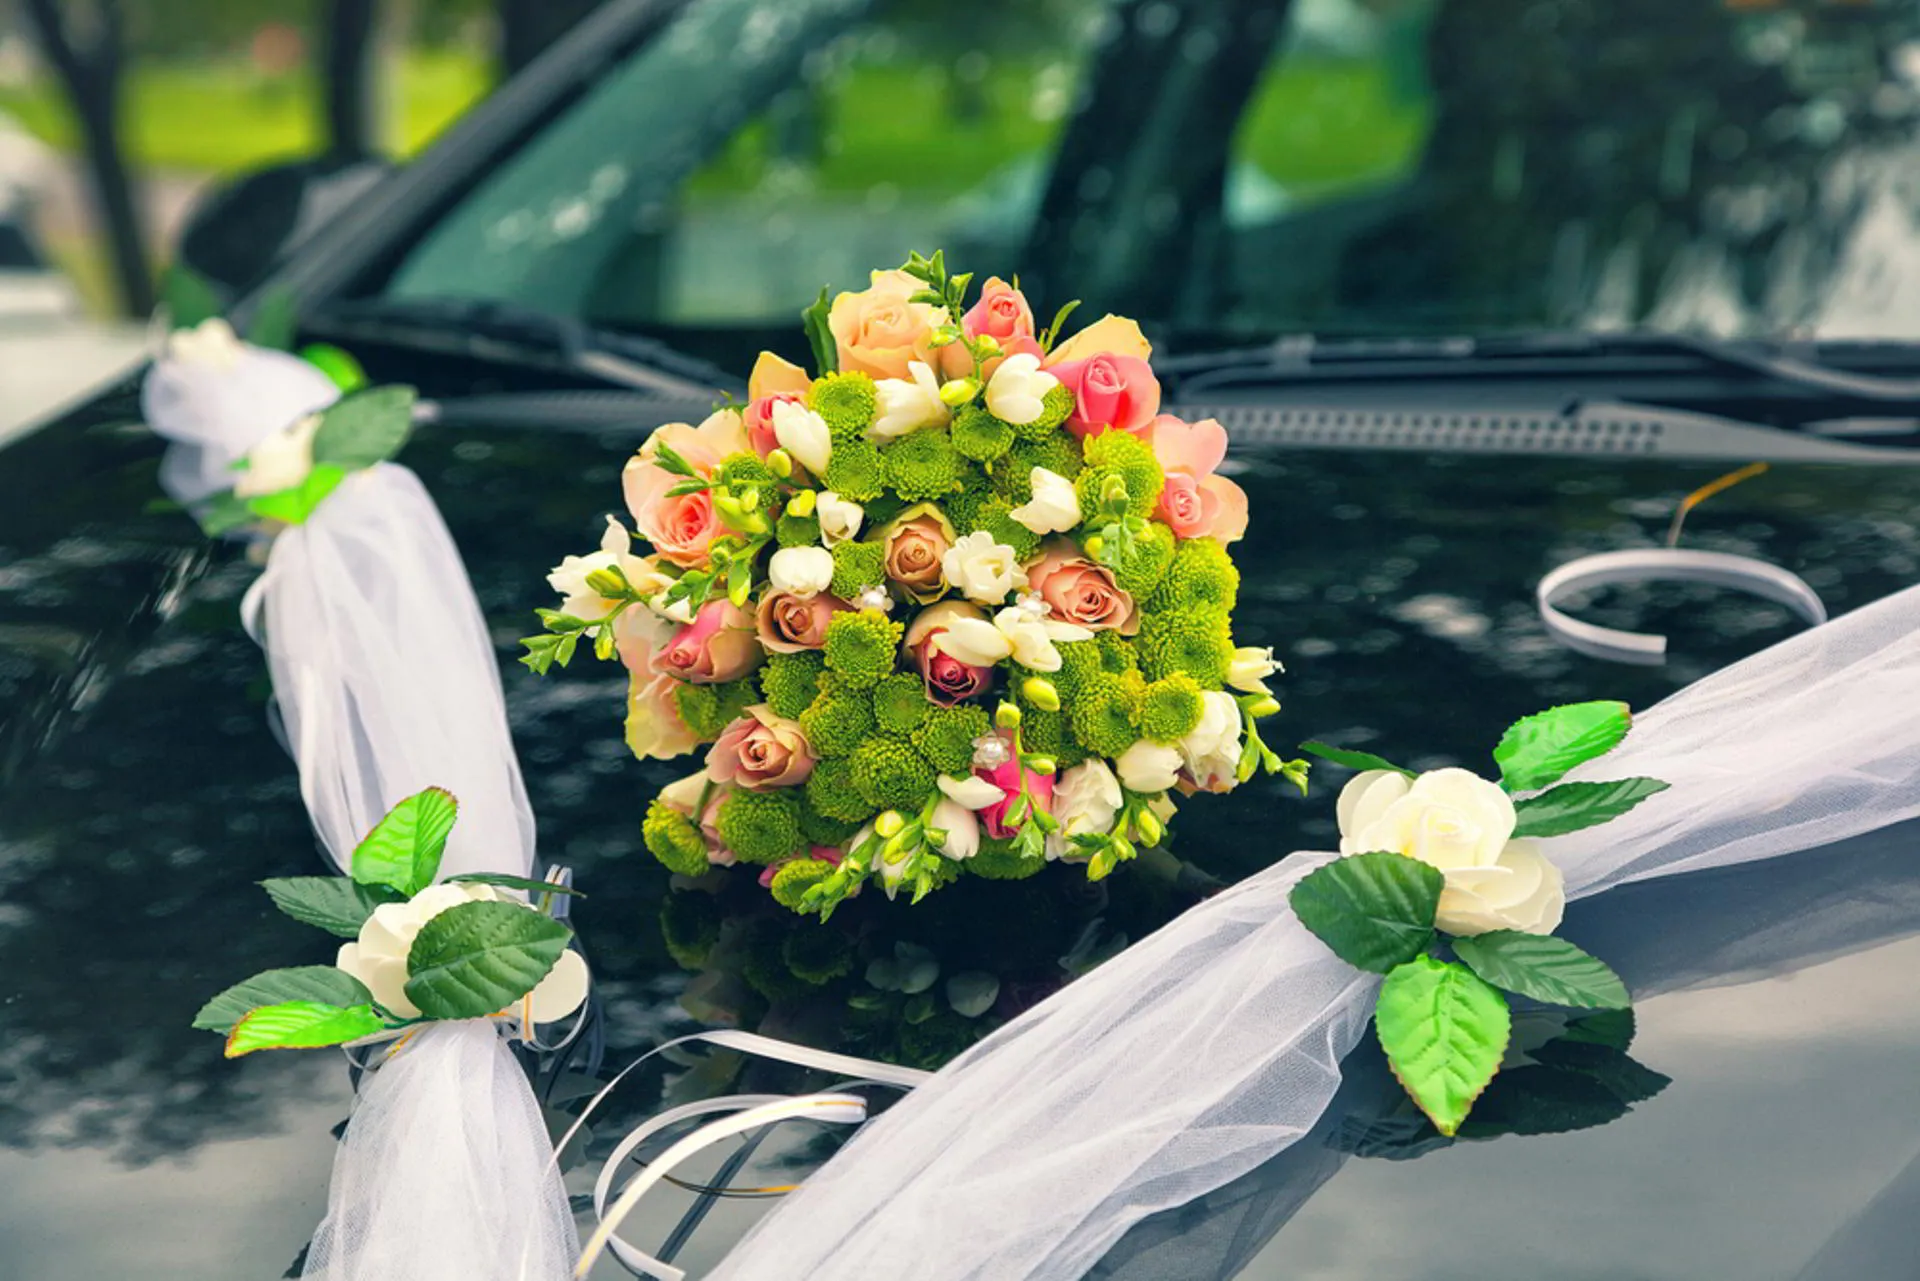 Best Modern, Classic and Vintage Wedding Car Decorations by Luxorides